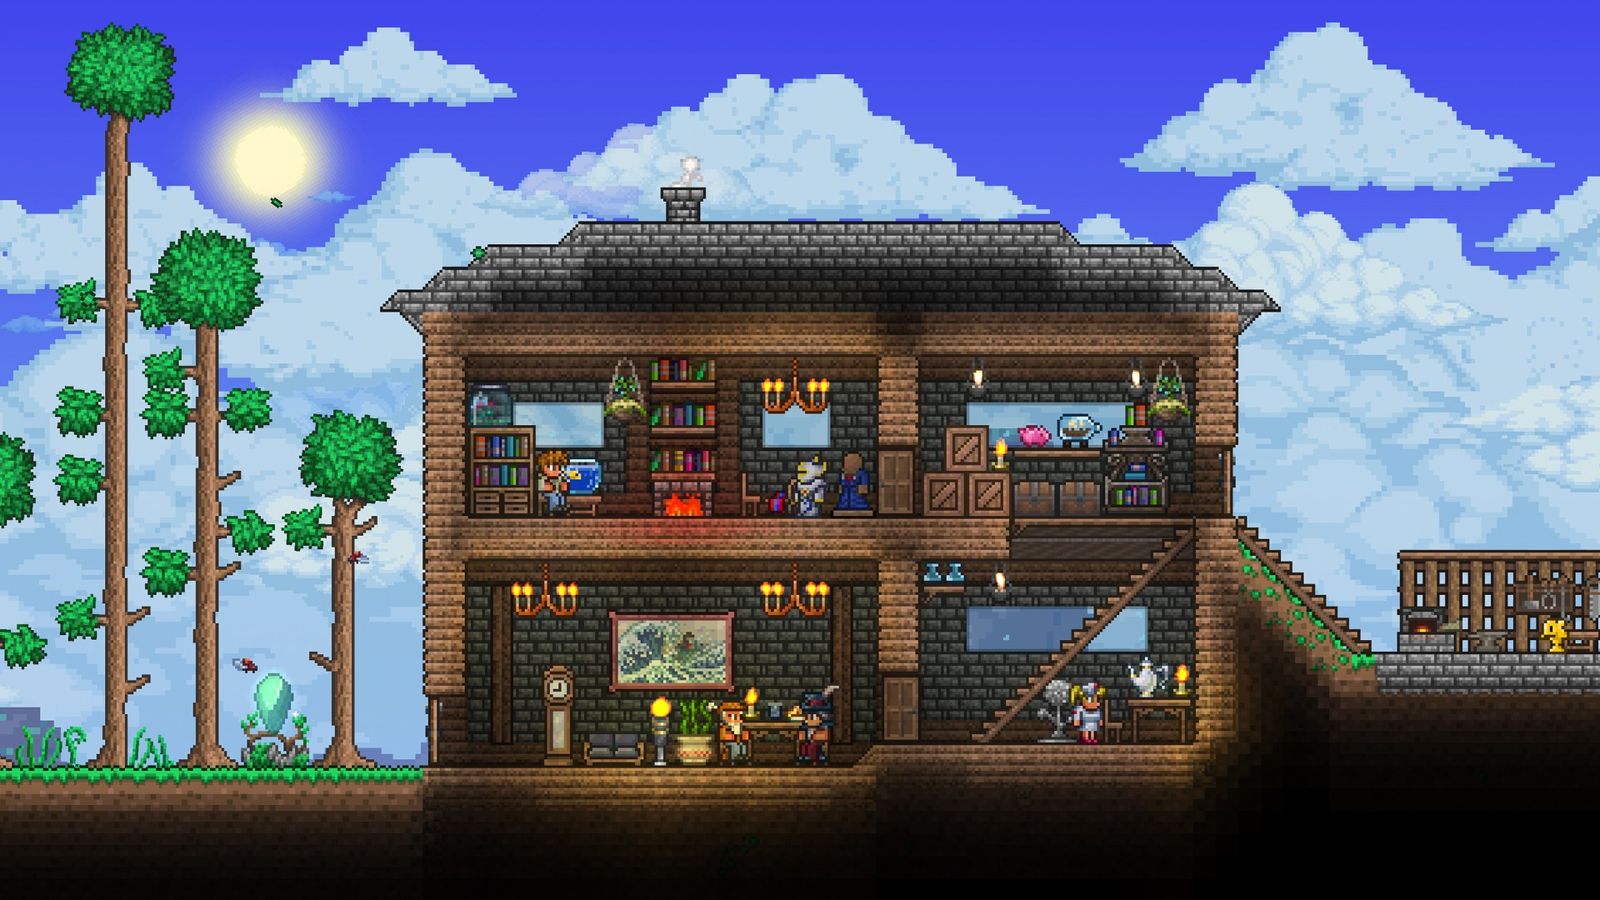 A 2D building in Terraria featuring four rooms next to three tall green trees.